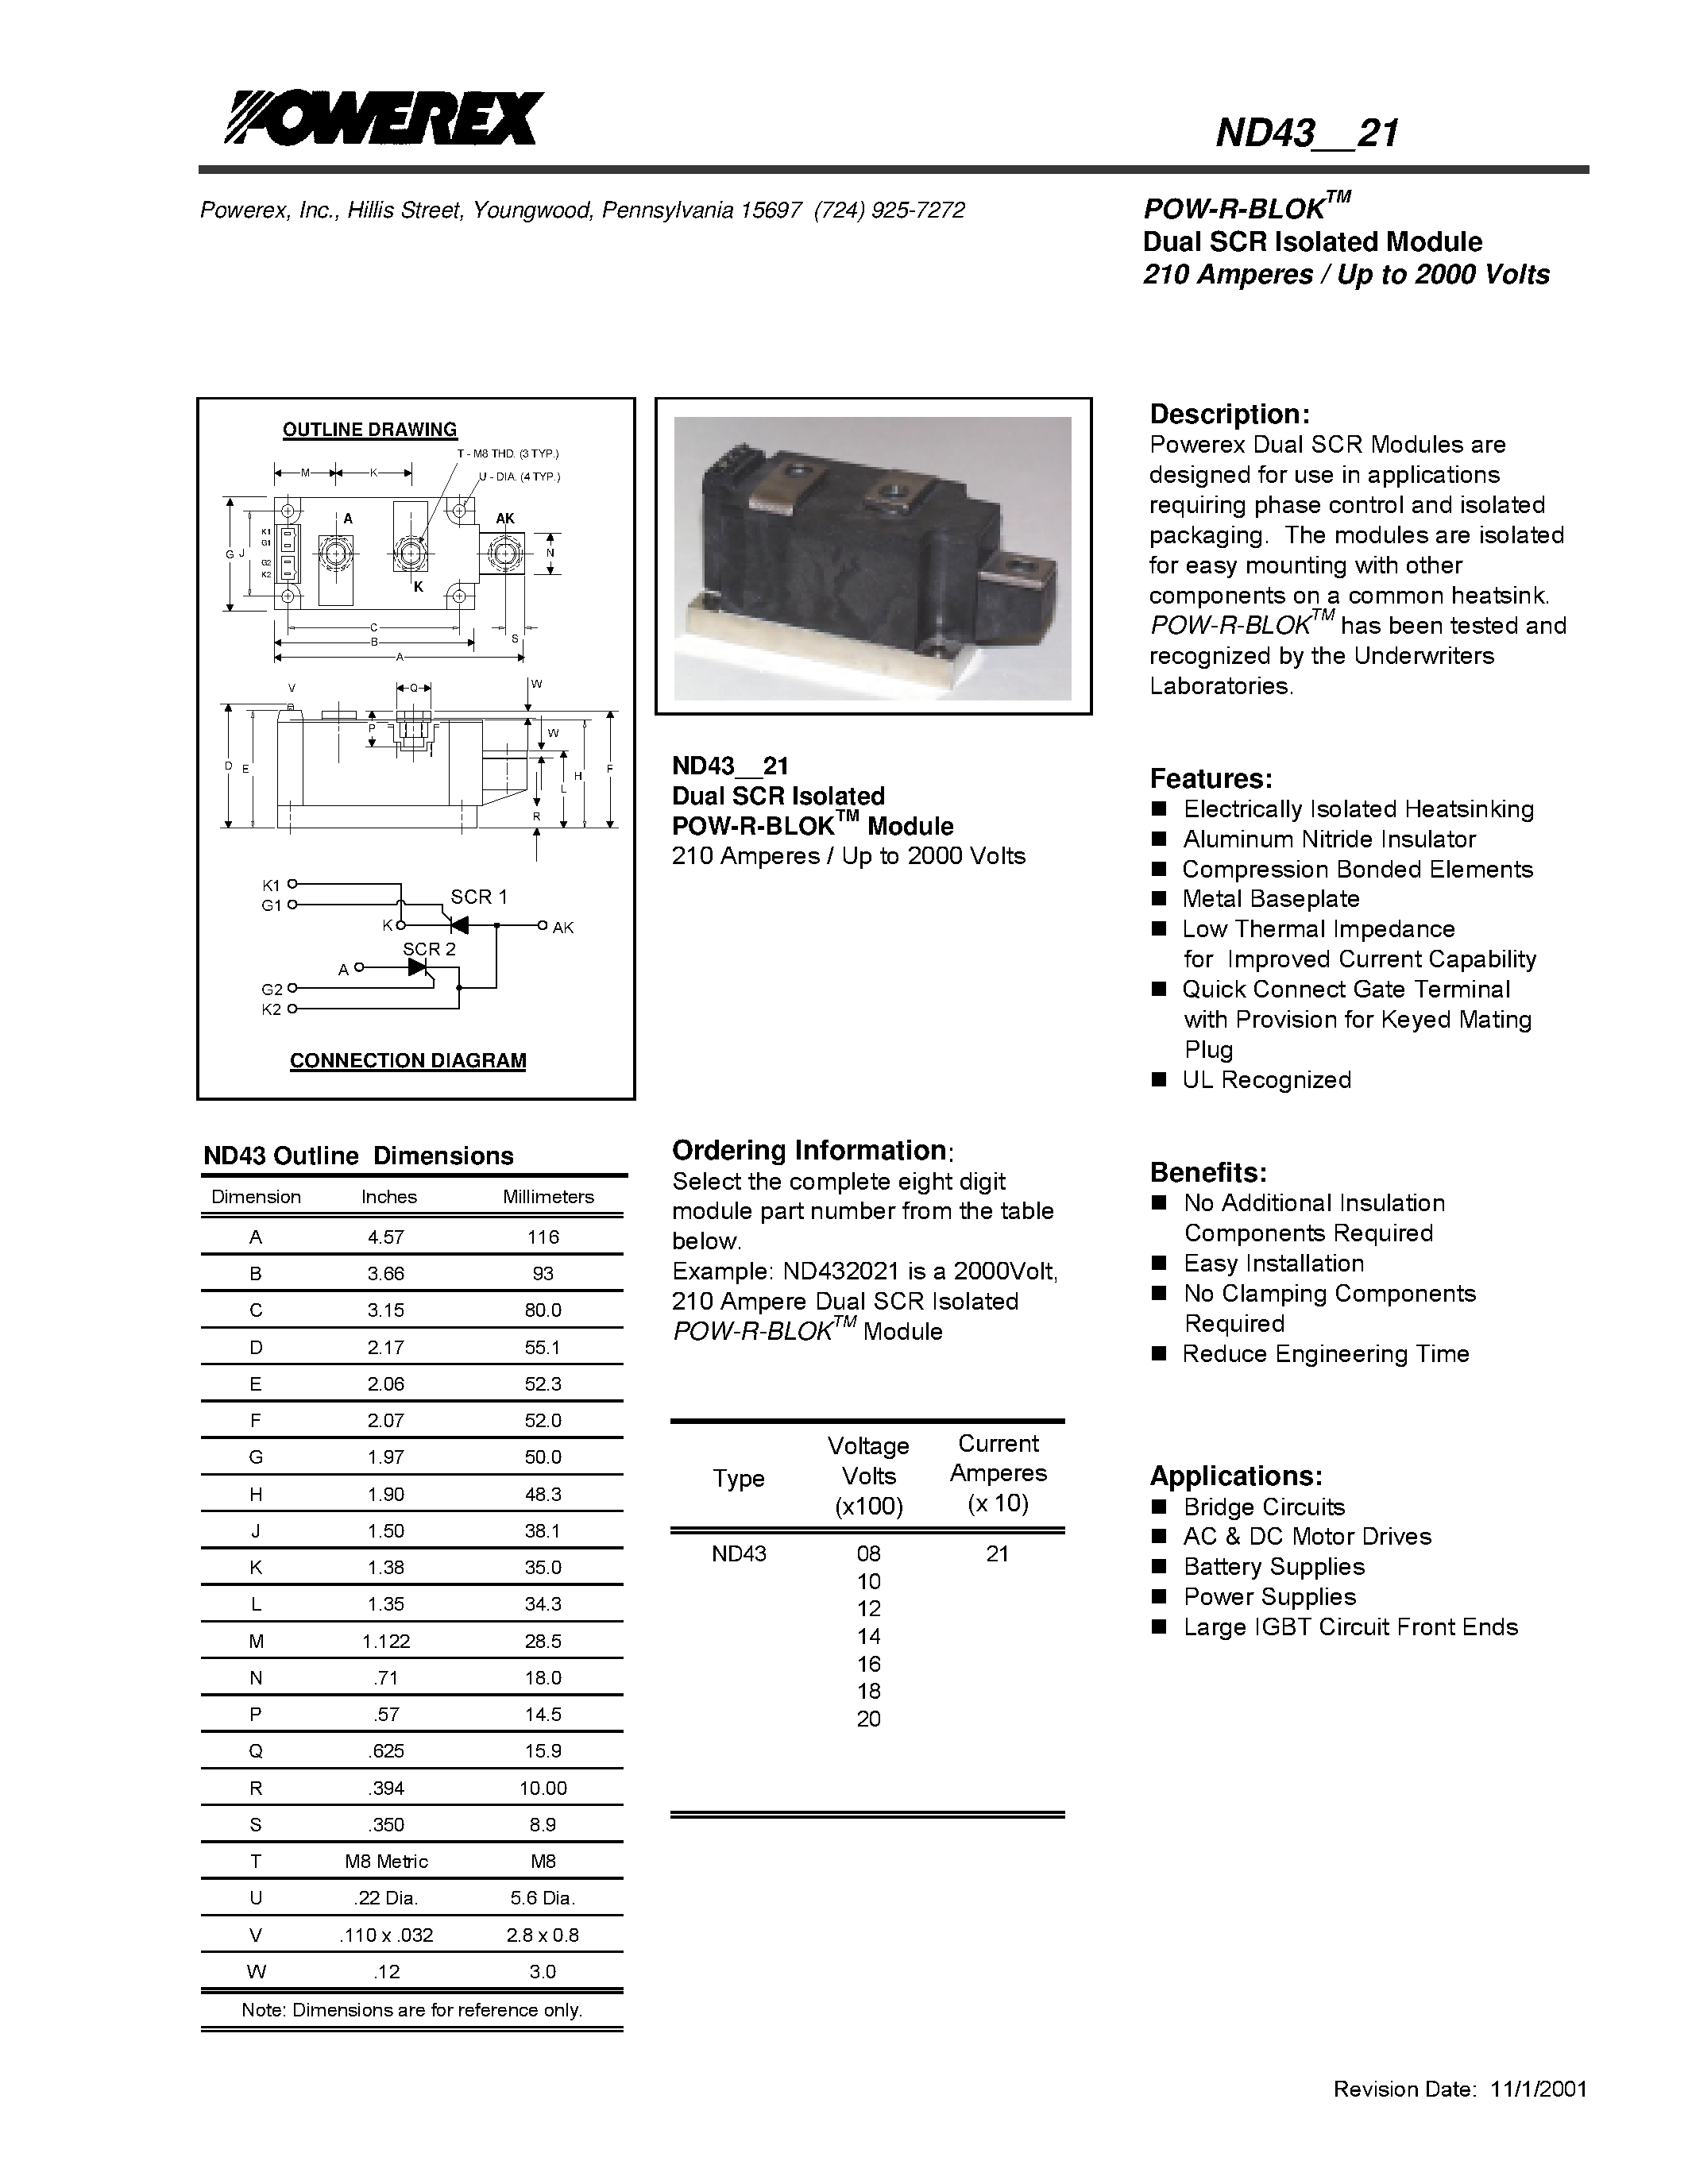 Datasheet ND4321 - POW-R-BLOK Dual SCR Isolated Module (210 Amperes / Up to 2000 Volts) page 1